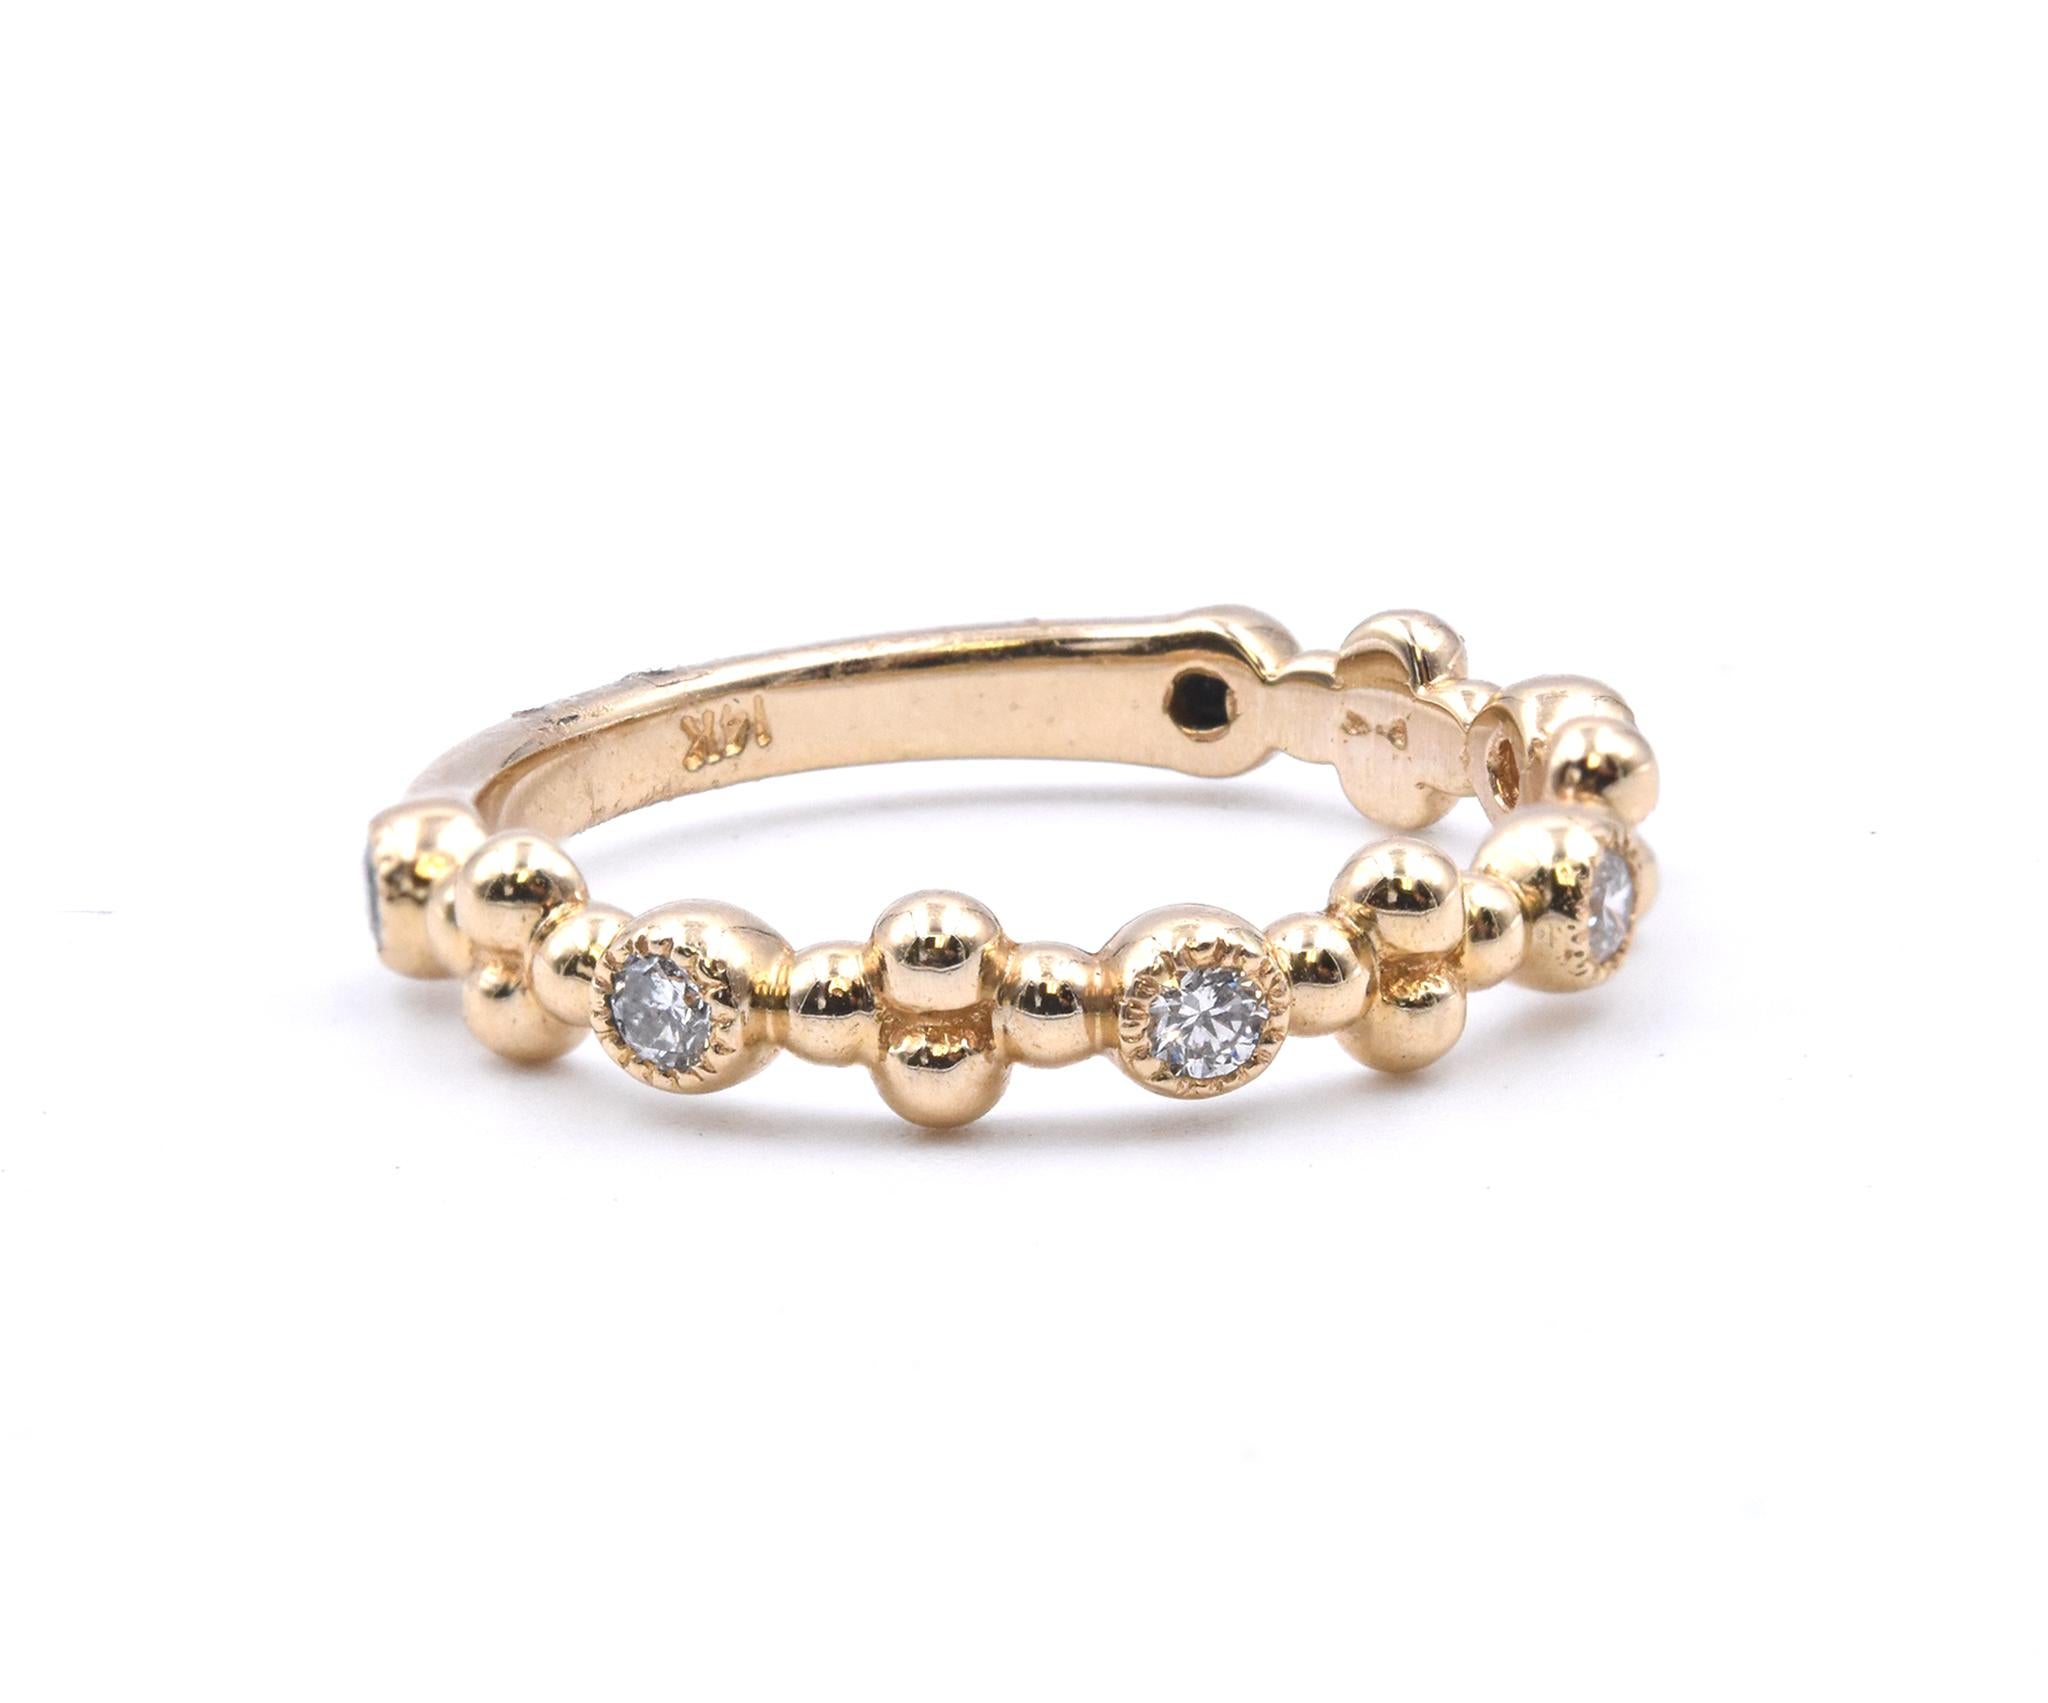 Designer: custom
Material: 14k yellow gold
Diamonds: 6 round cut = .20cttw
Color: G
Clarity: VS
Size: 6.5 (please allow two additional shipping days for sizing requests)  
Dimensions: ring measures 2.7mm in width
Weight: 2.46 grams